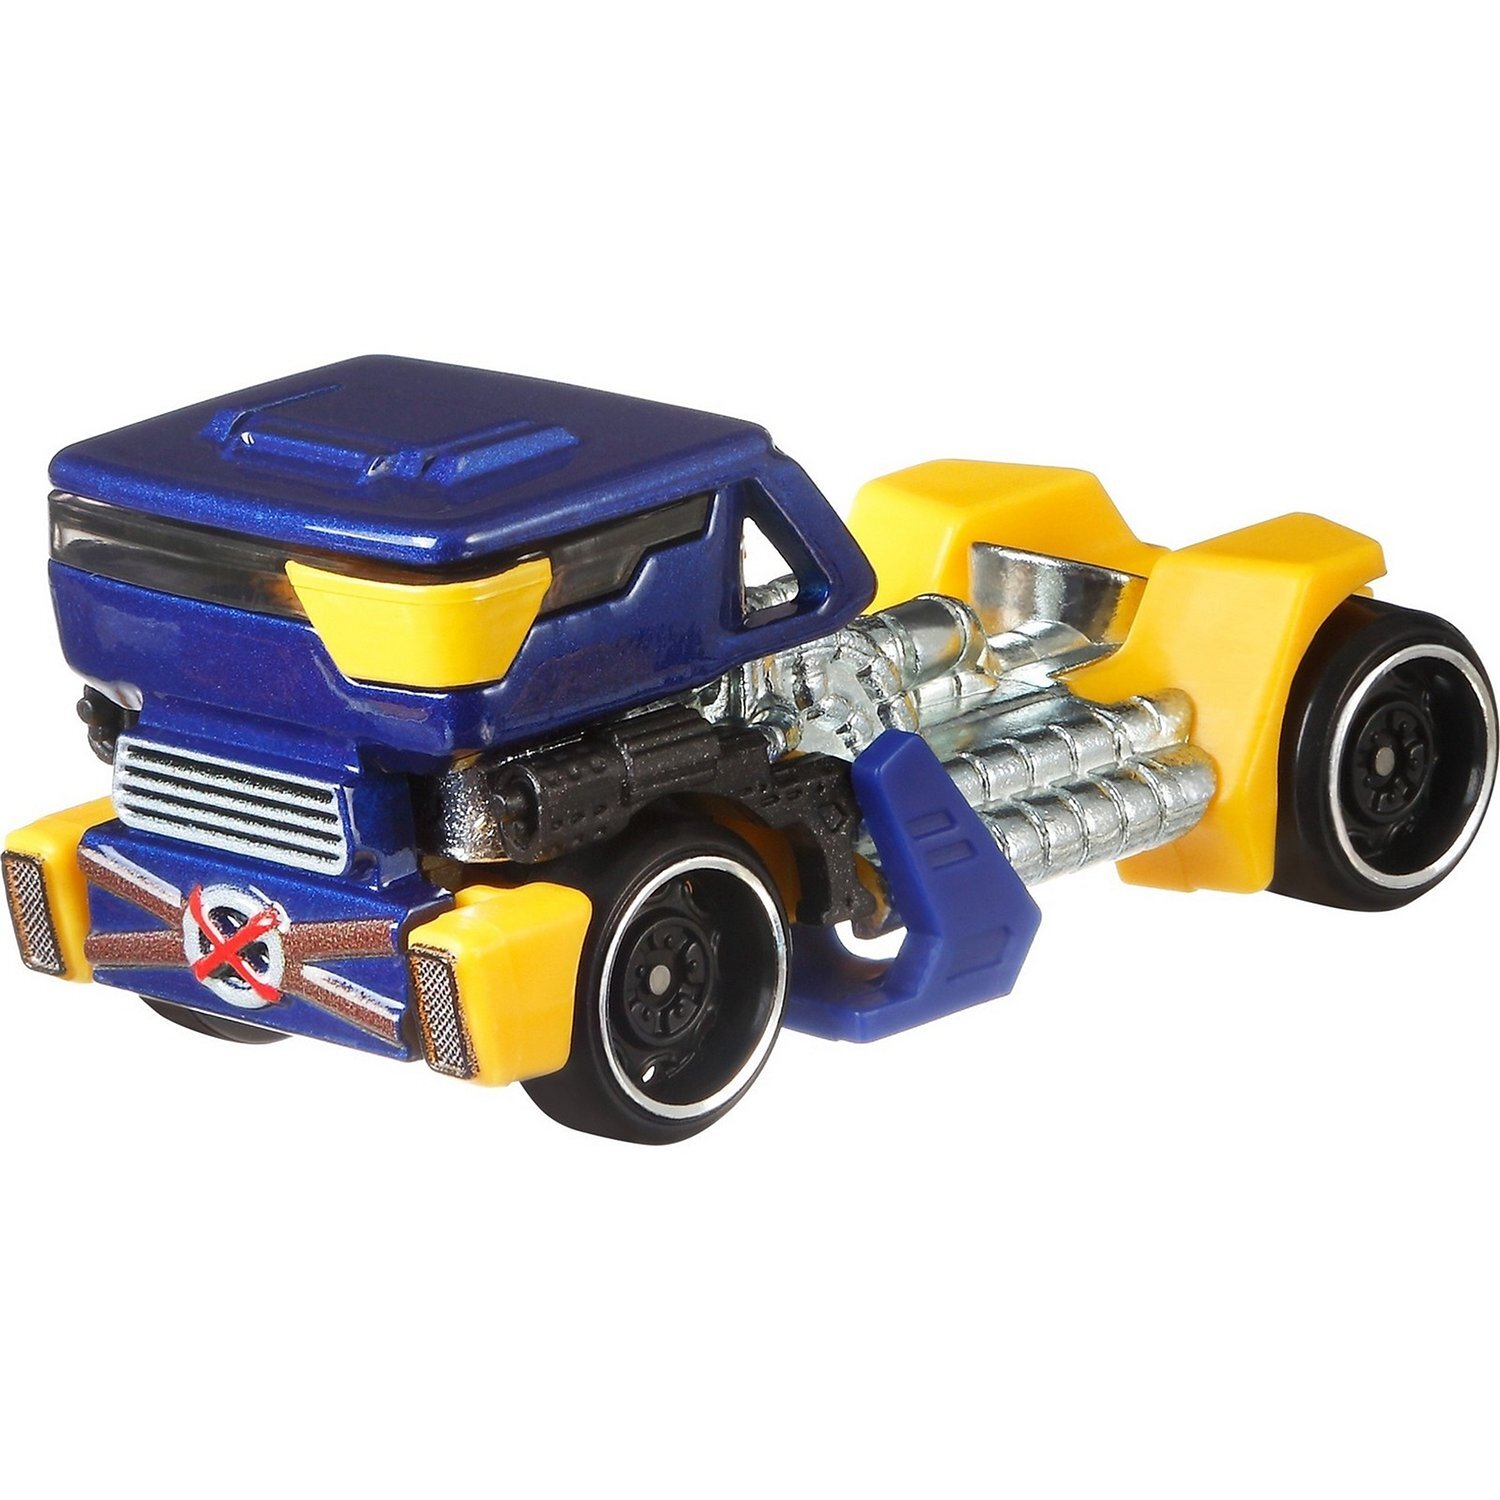 Hot Wheels Character Cars Marvel Cable